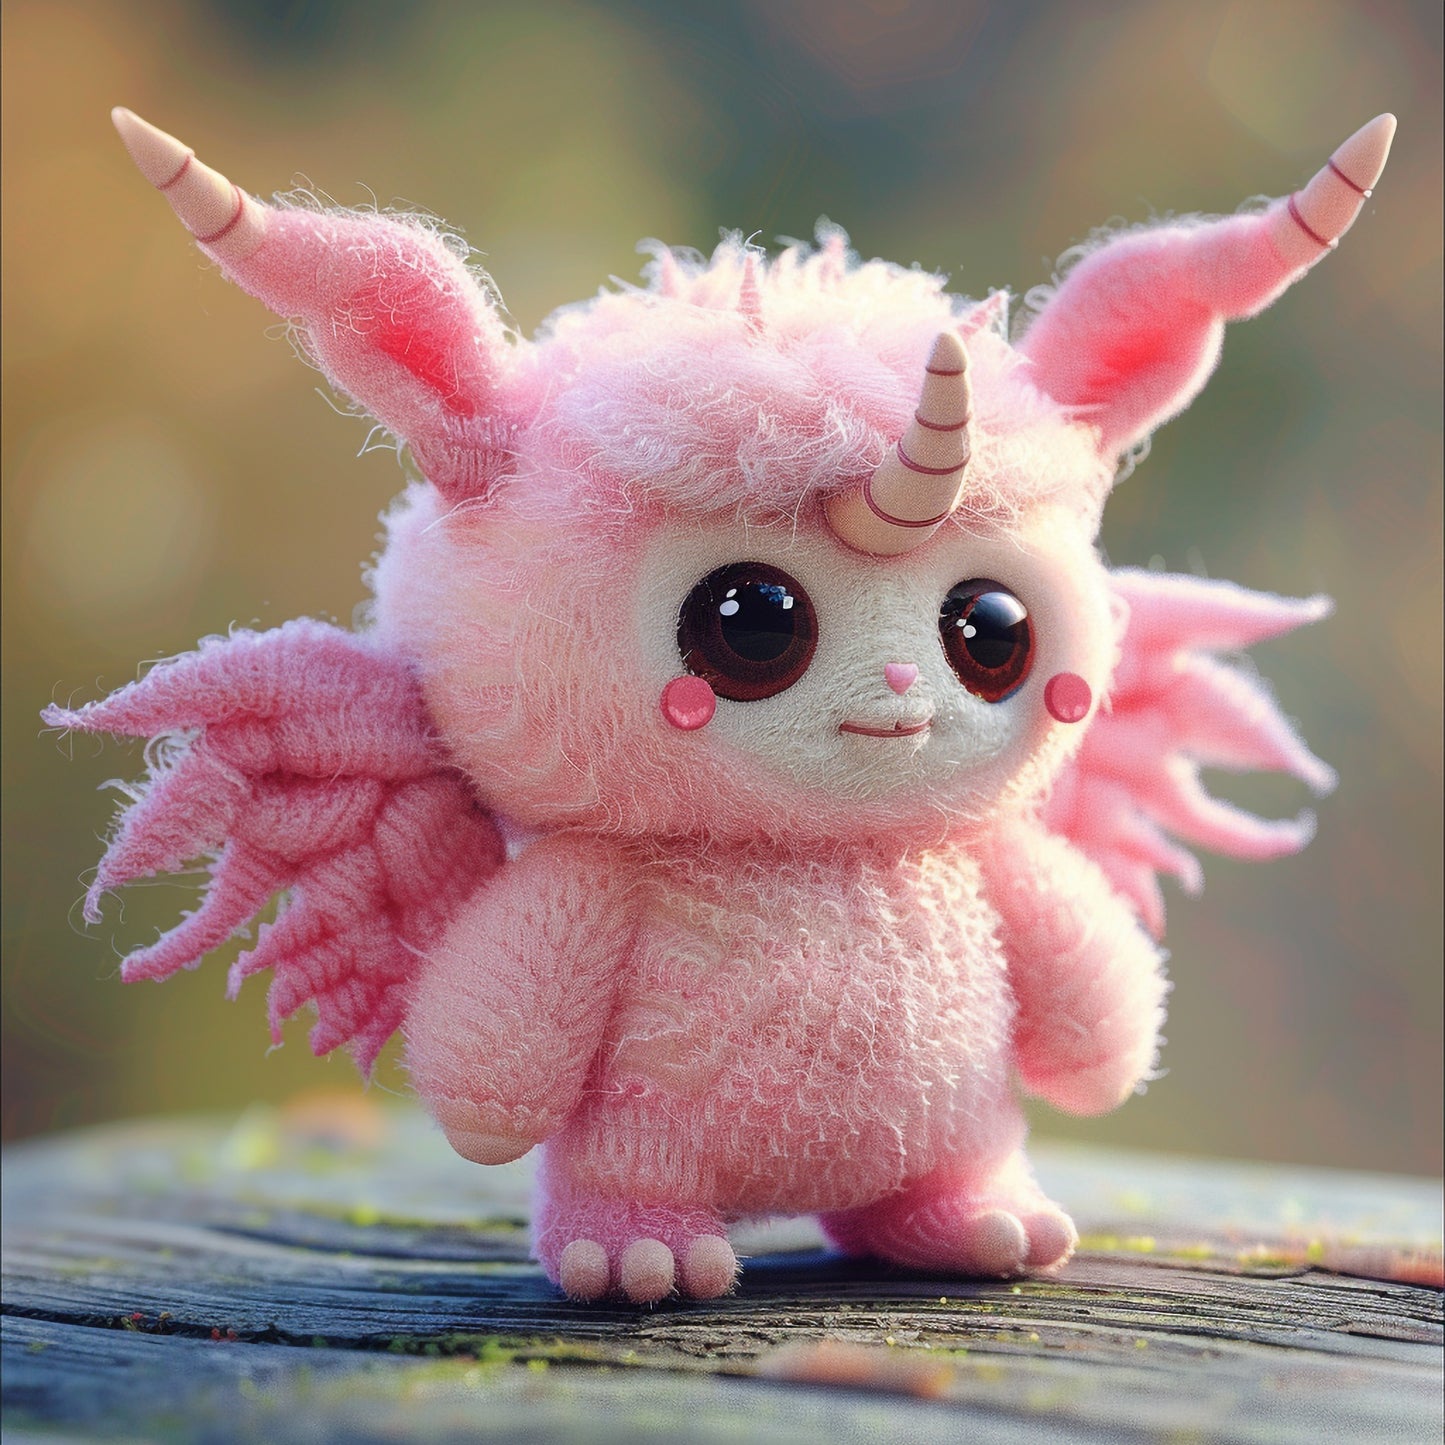 Handmade Needle Felted Pink Toy Standing Outdoors